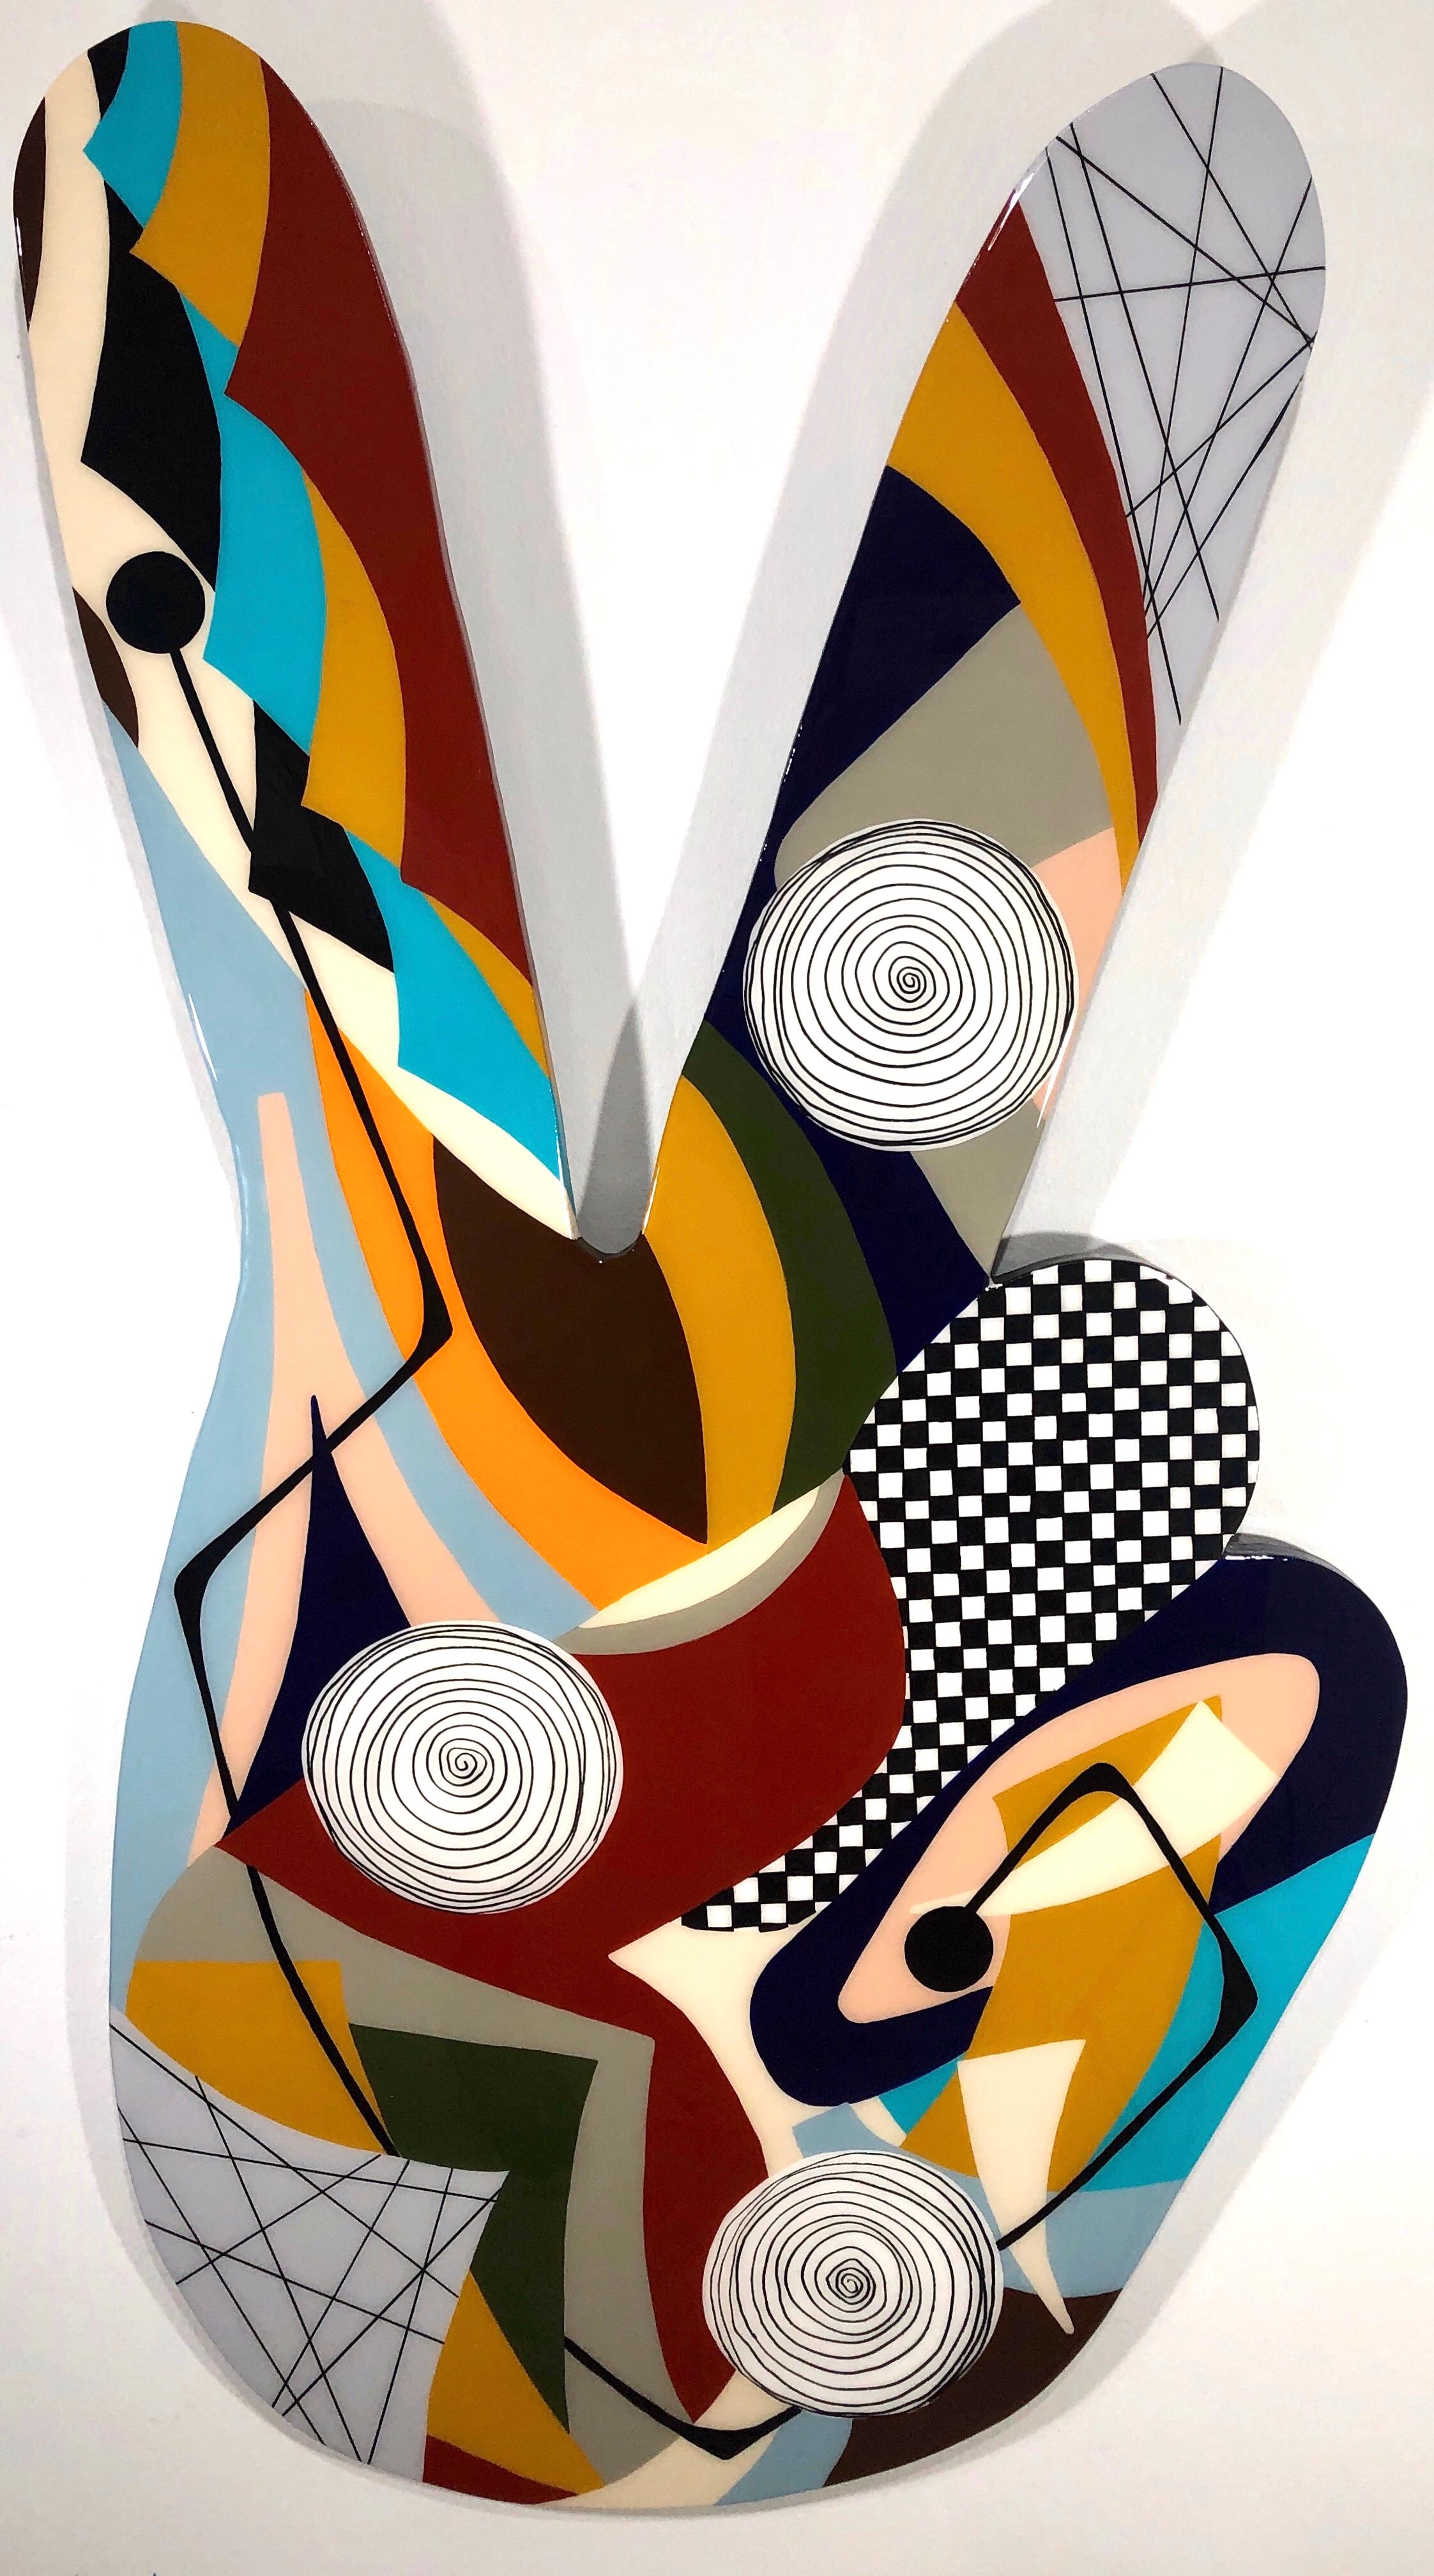 Amauri Torezan
Peace and Love
Acrylic and Resin on Wood
48" x 25"

Torezan is a contemporary artist living in South Florida in the United States. Inspired by modernist abstractions and the modern lifestyle in the Mid-20th century, the artist